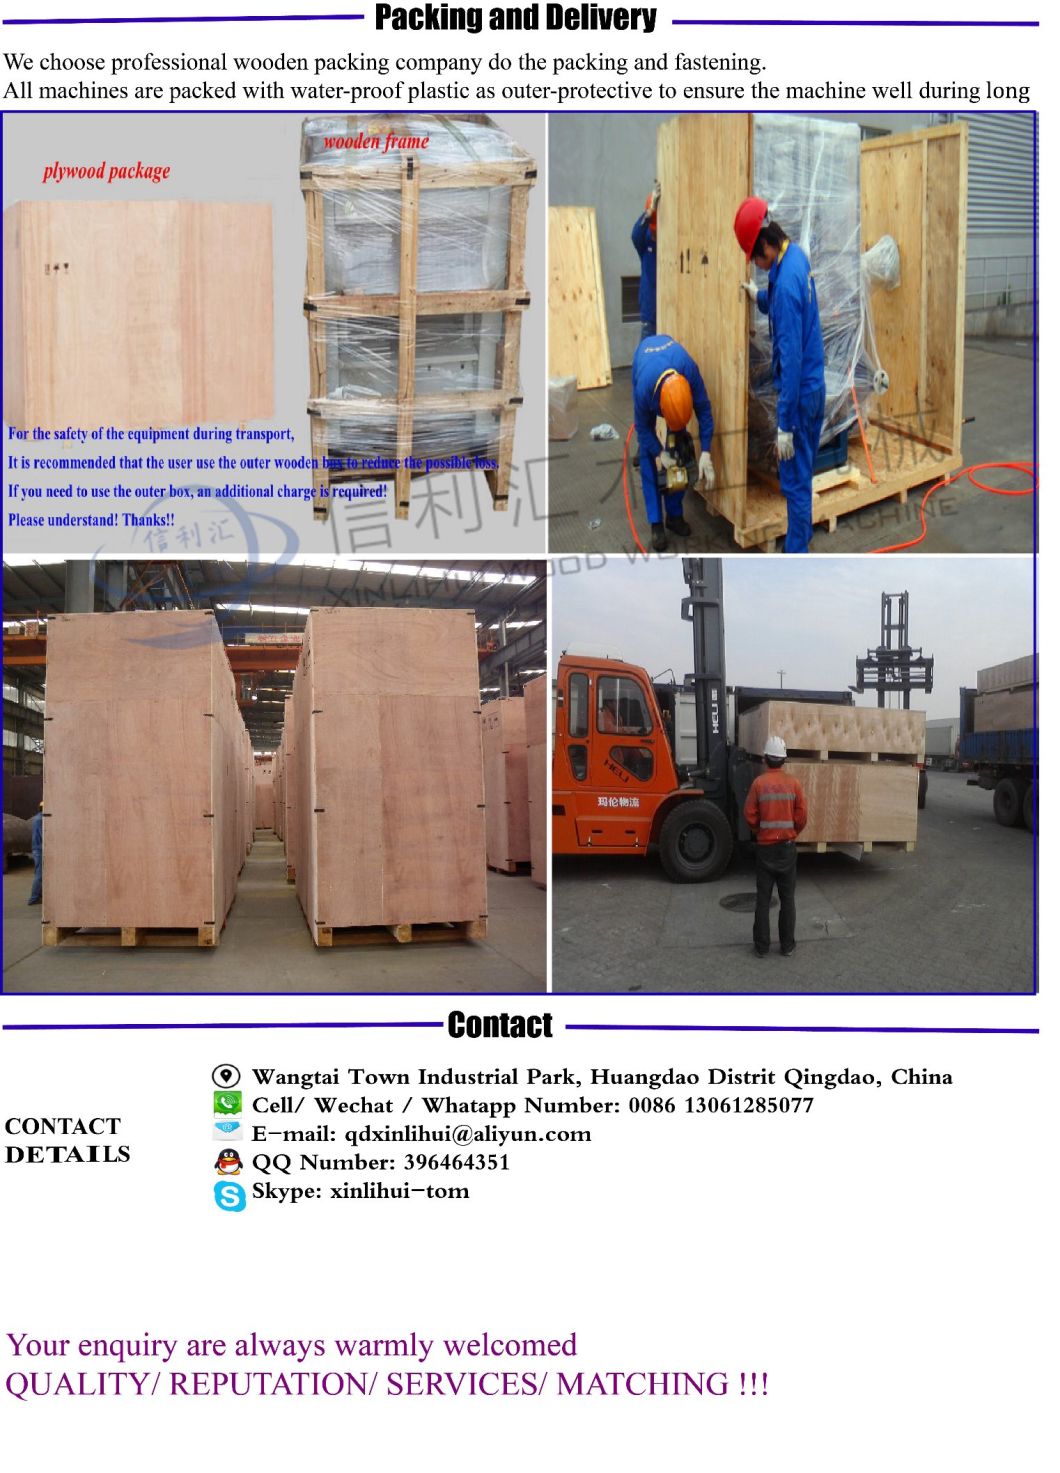 Wood Cutting Tools Precise Sliding Table Saw Machine Workshop Machines, Tools and Equipment